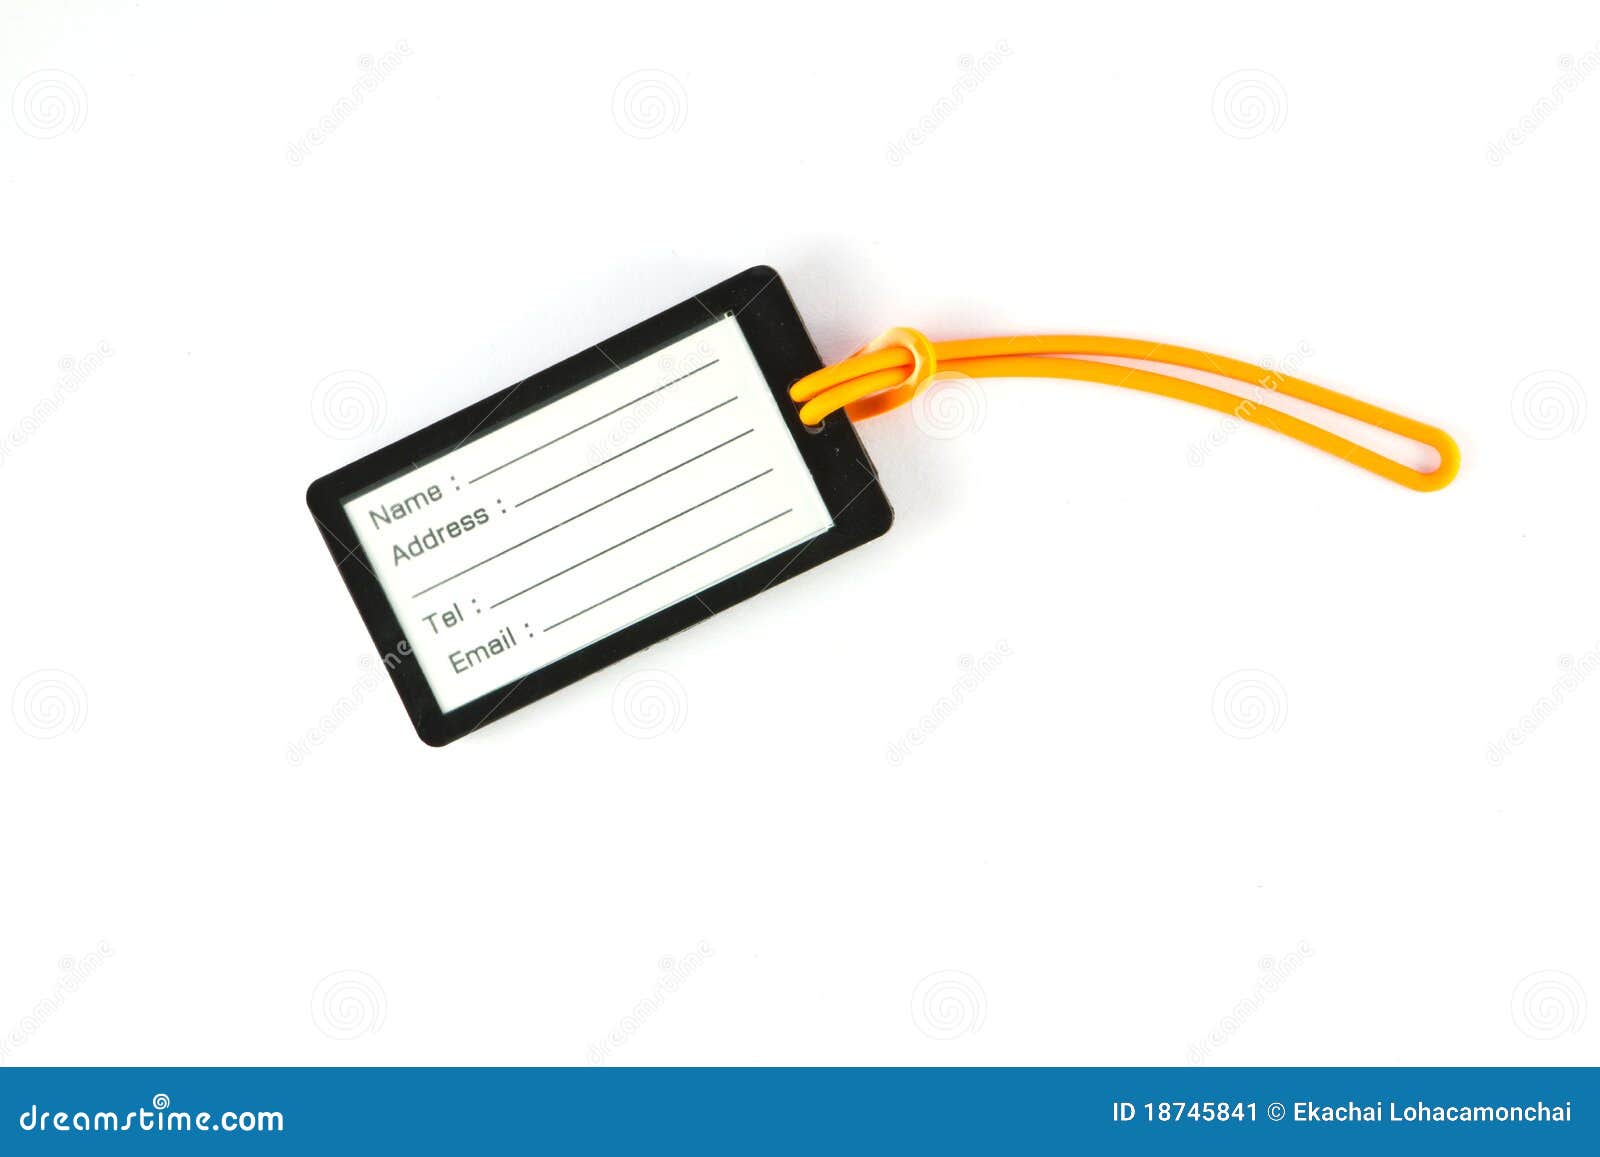 name-tag-for-luggage-isolated-stock-image-image-of-attach-notice